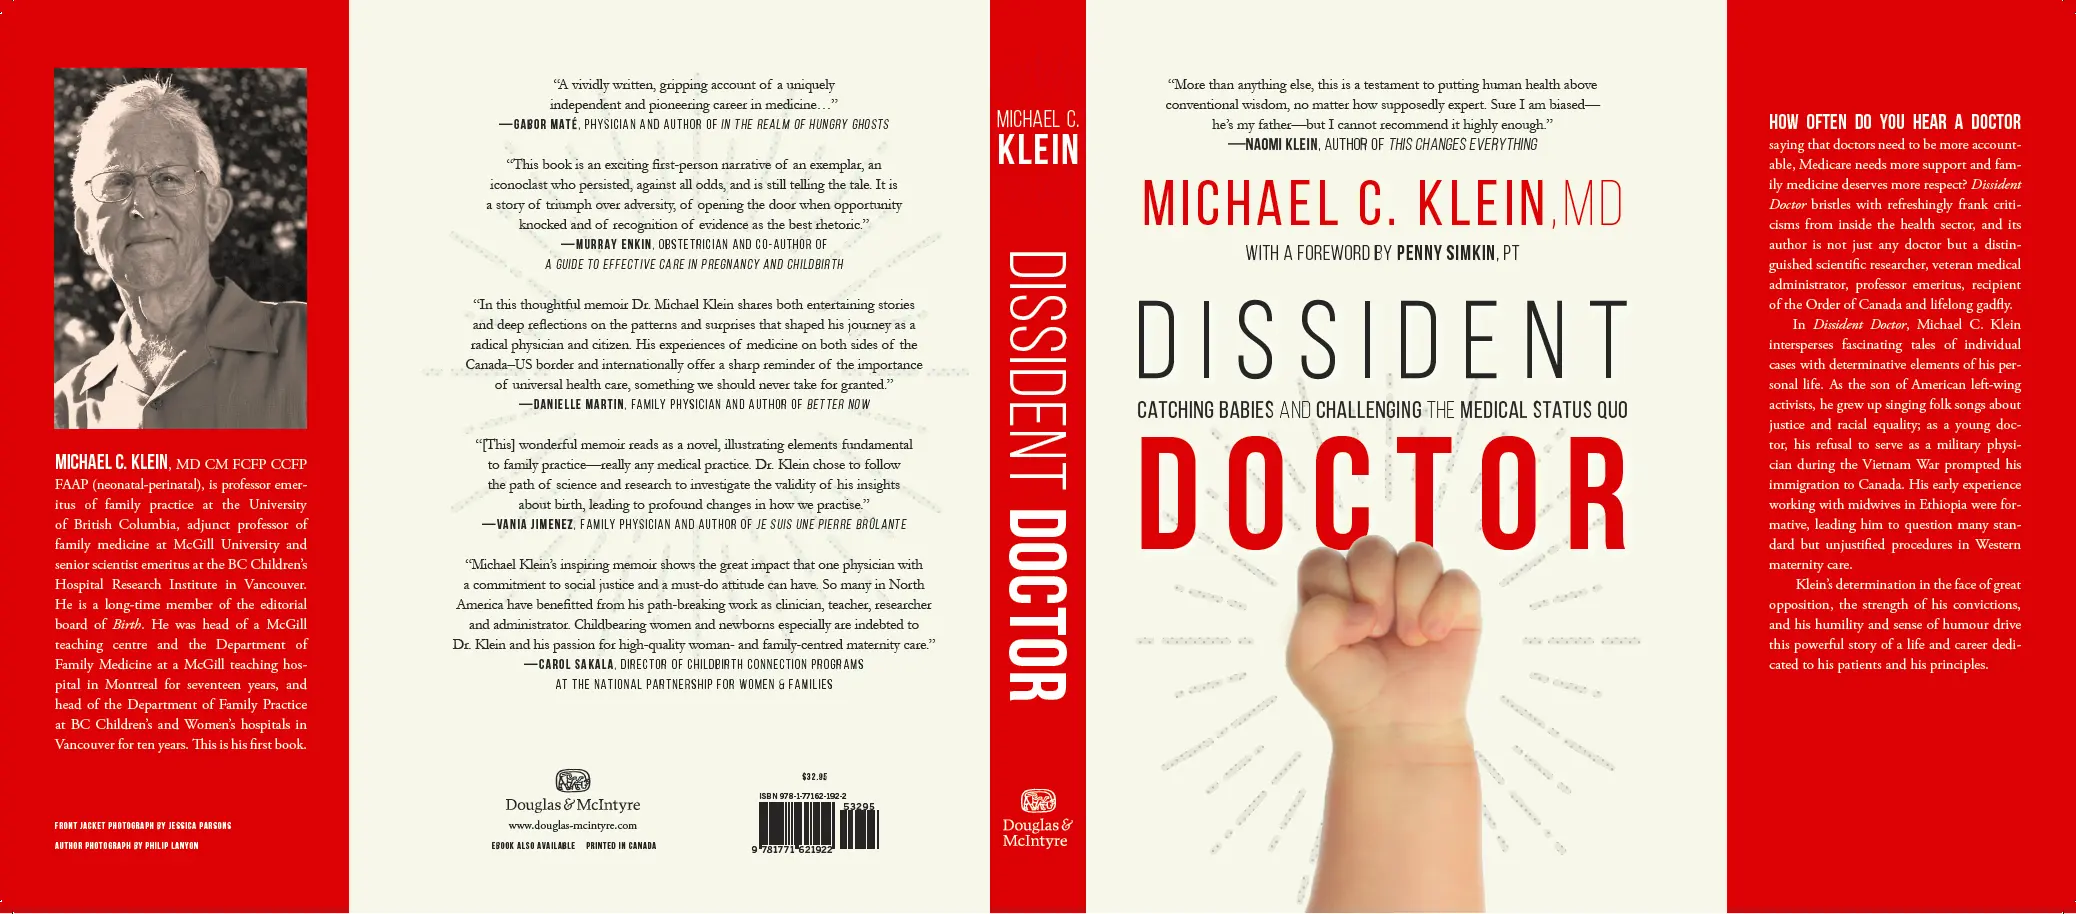 Dissident Doctor: catching babies and challenging the medical status quo.